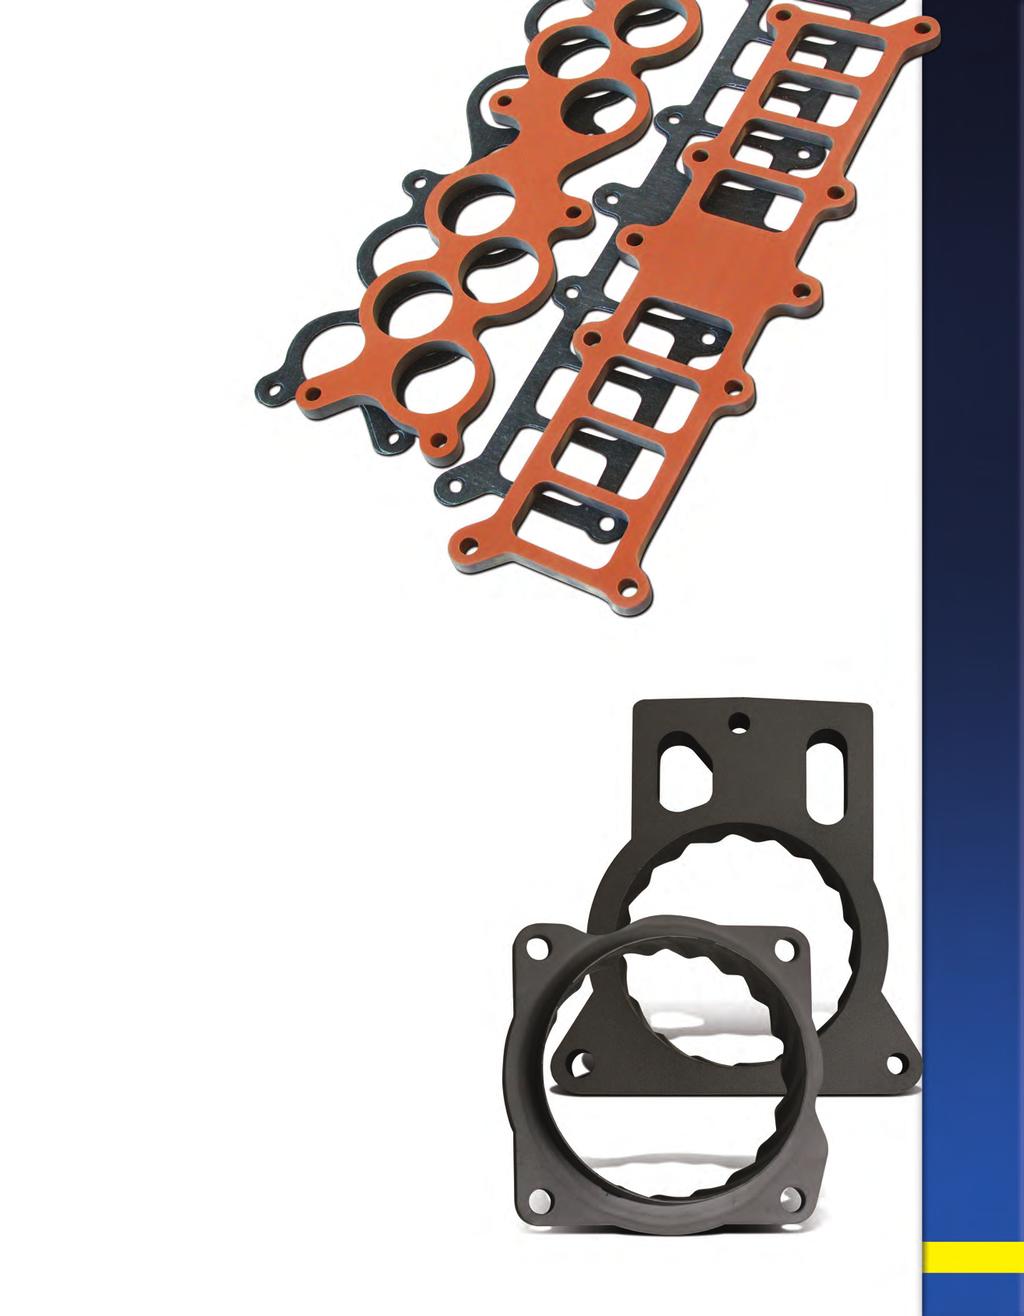 PHENOLIC MUSTANG MANIFOLD SPACERS EASY TO INSTALL, INCLUDES NEW BOLTS & GASKETS BOLT-ON 4 7 HORSEPOWER BY REDUCING HEAT AND INCREASING RUNNER LENGTHS As one of the most affordable bolt-ons for today